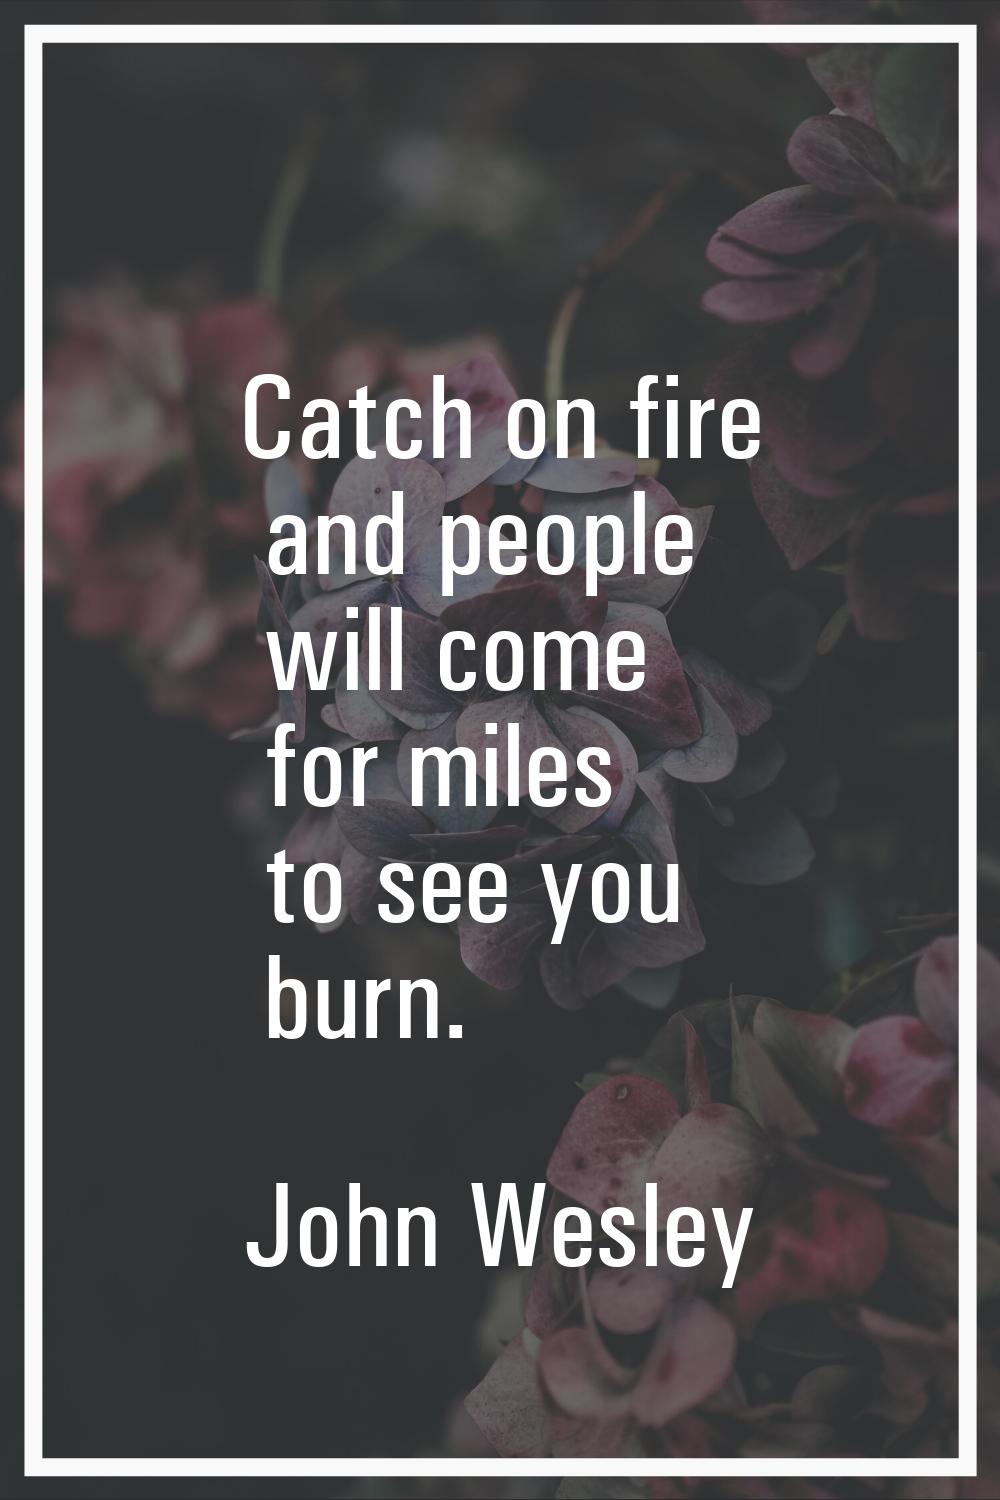 Catch on fire and people will come for miles to see you burn.